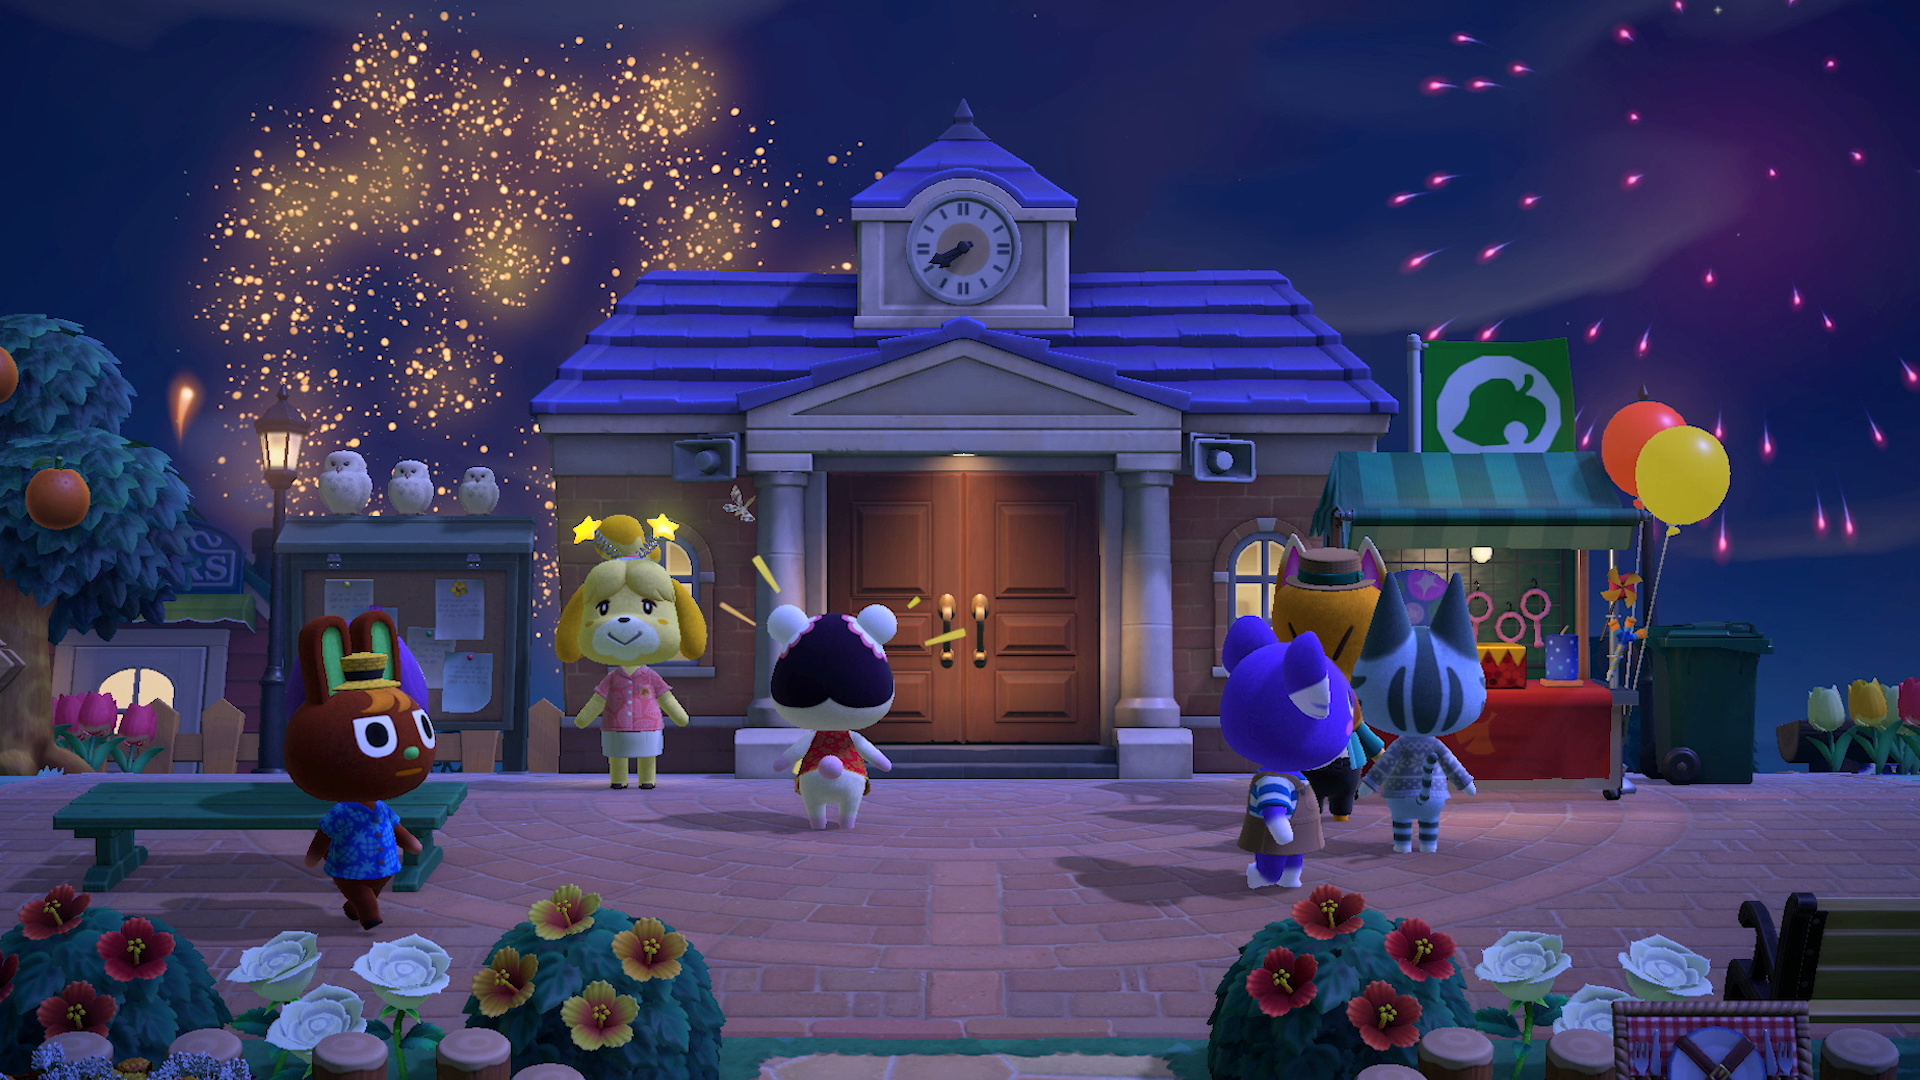 Switch_ACNH_SummerUpdate-02-2020_screen_01 This Week's Nintendo Downloads: Have a Blast With Fireworks and Dreams in Animal Crossing: New Horizons